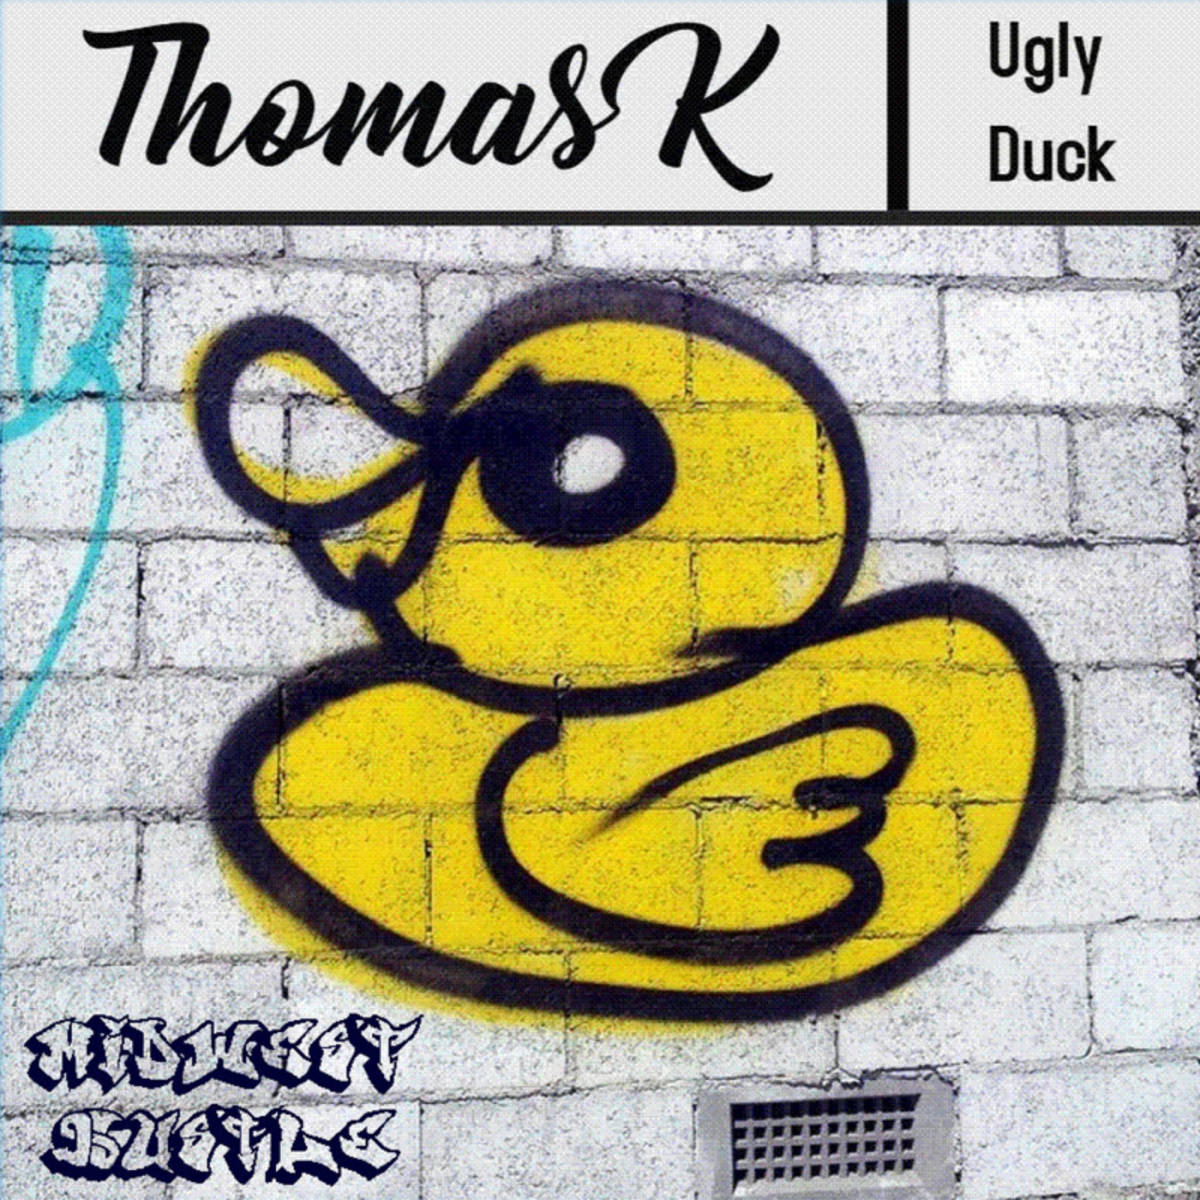 Thomas K - Ugly Duck / Midwest Hustle Music